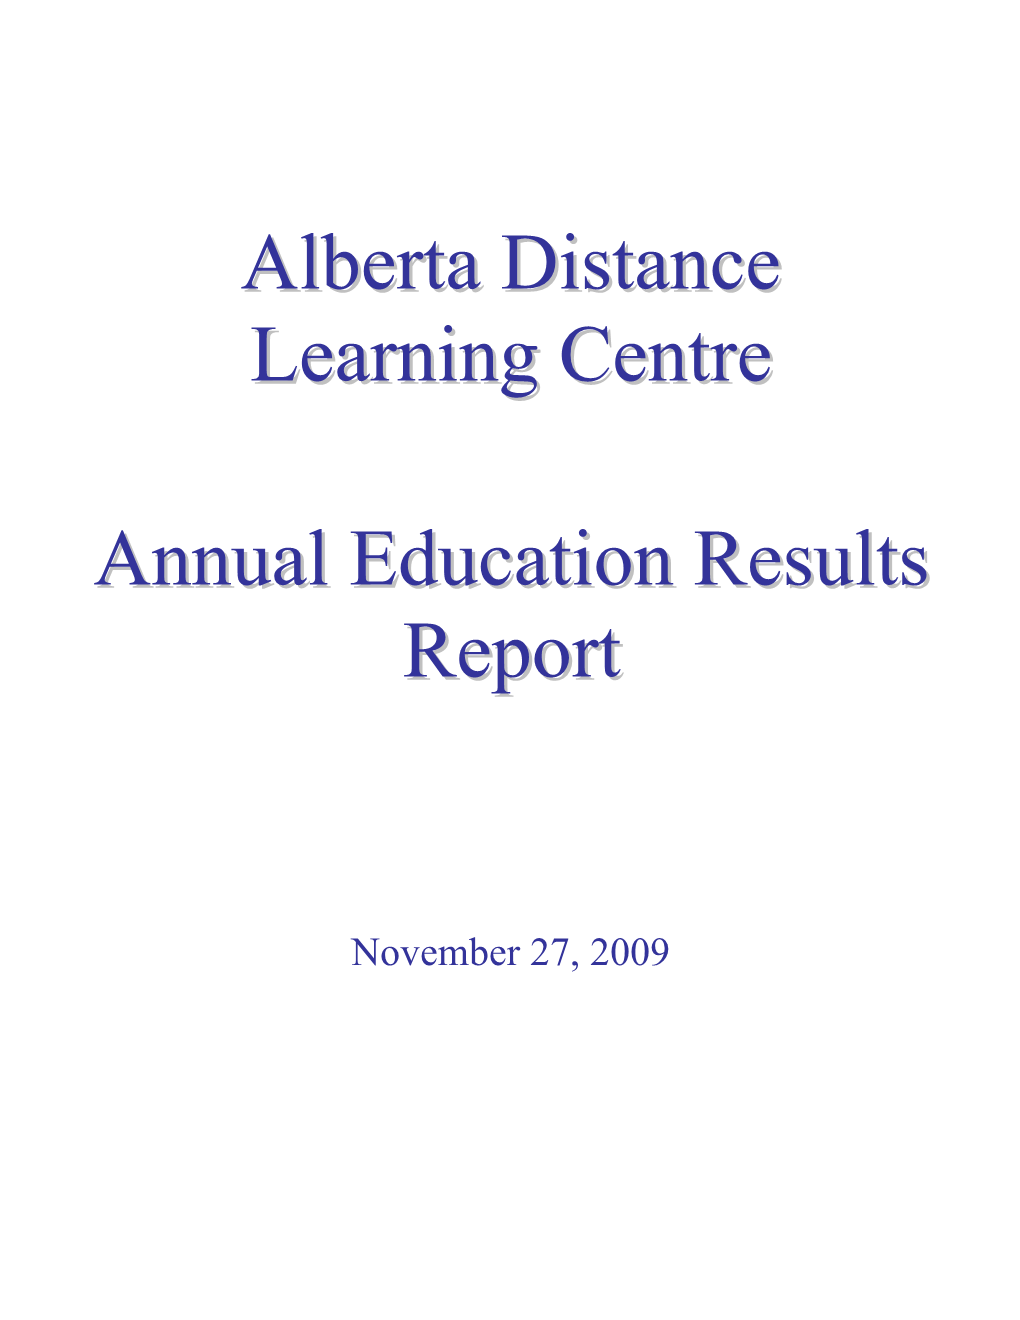 Alberta Distance Learning Centre Annual Education Results Report